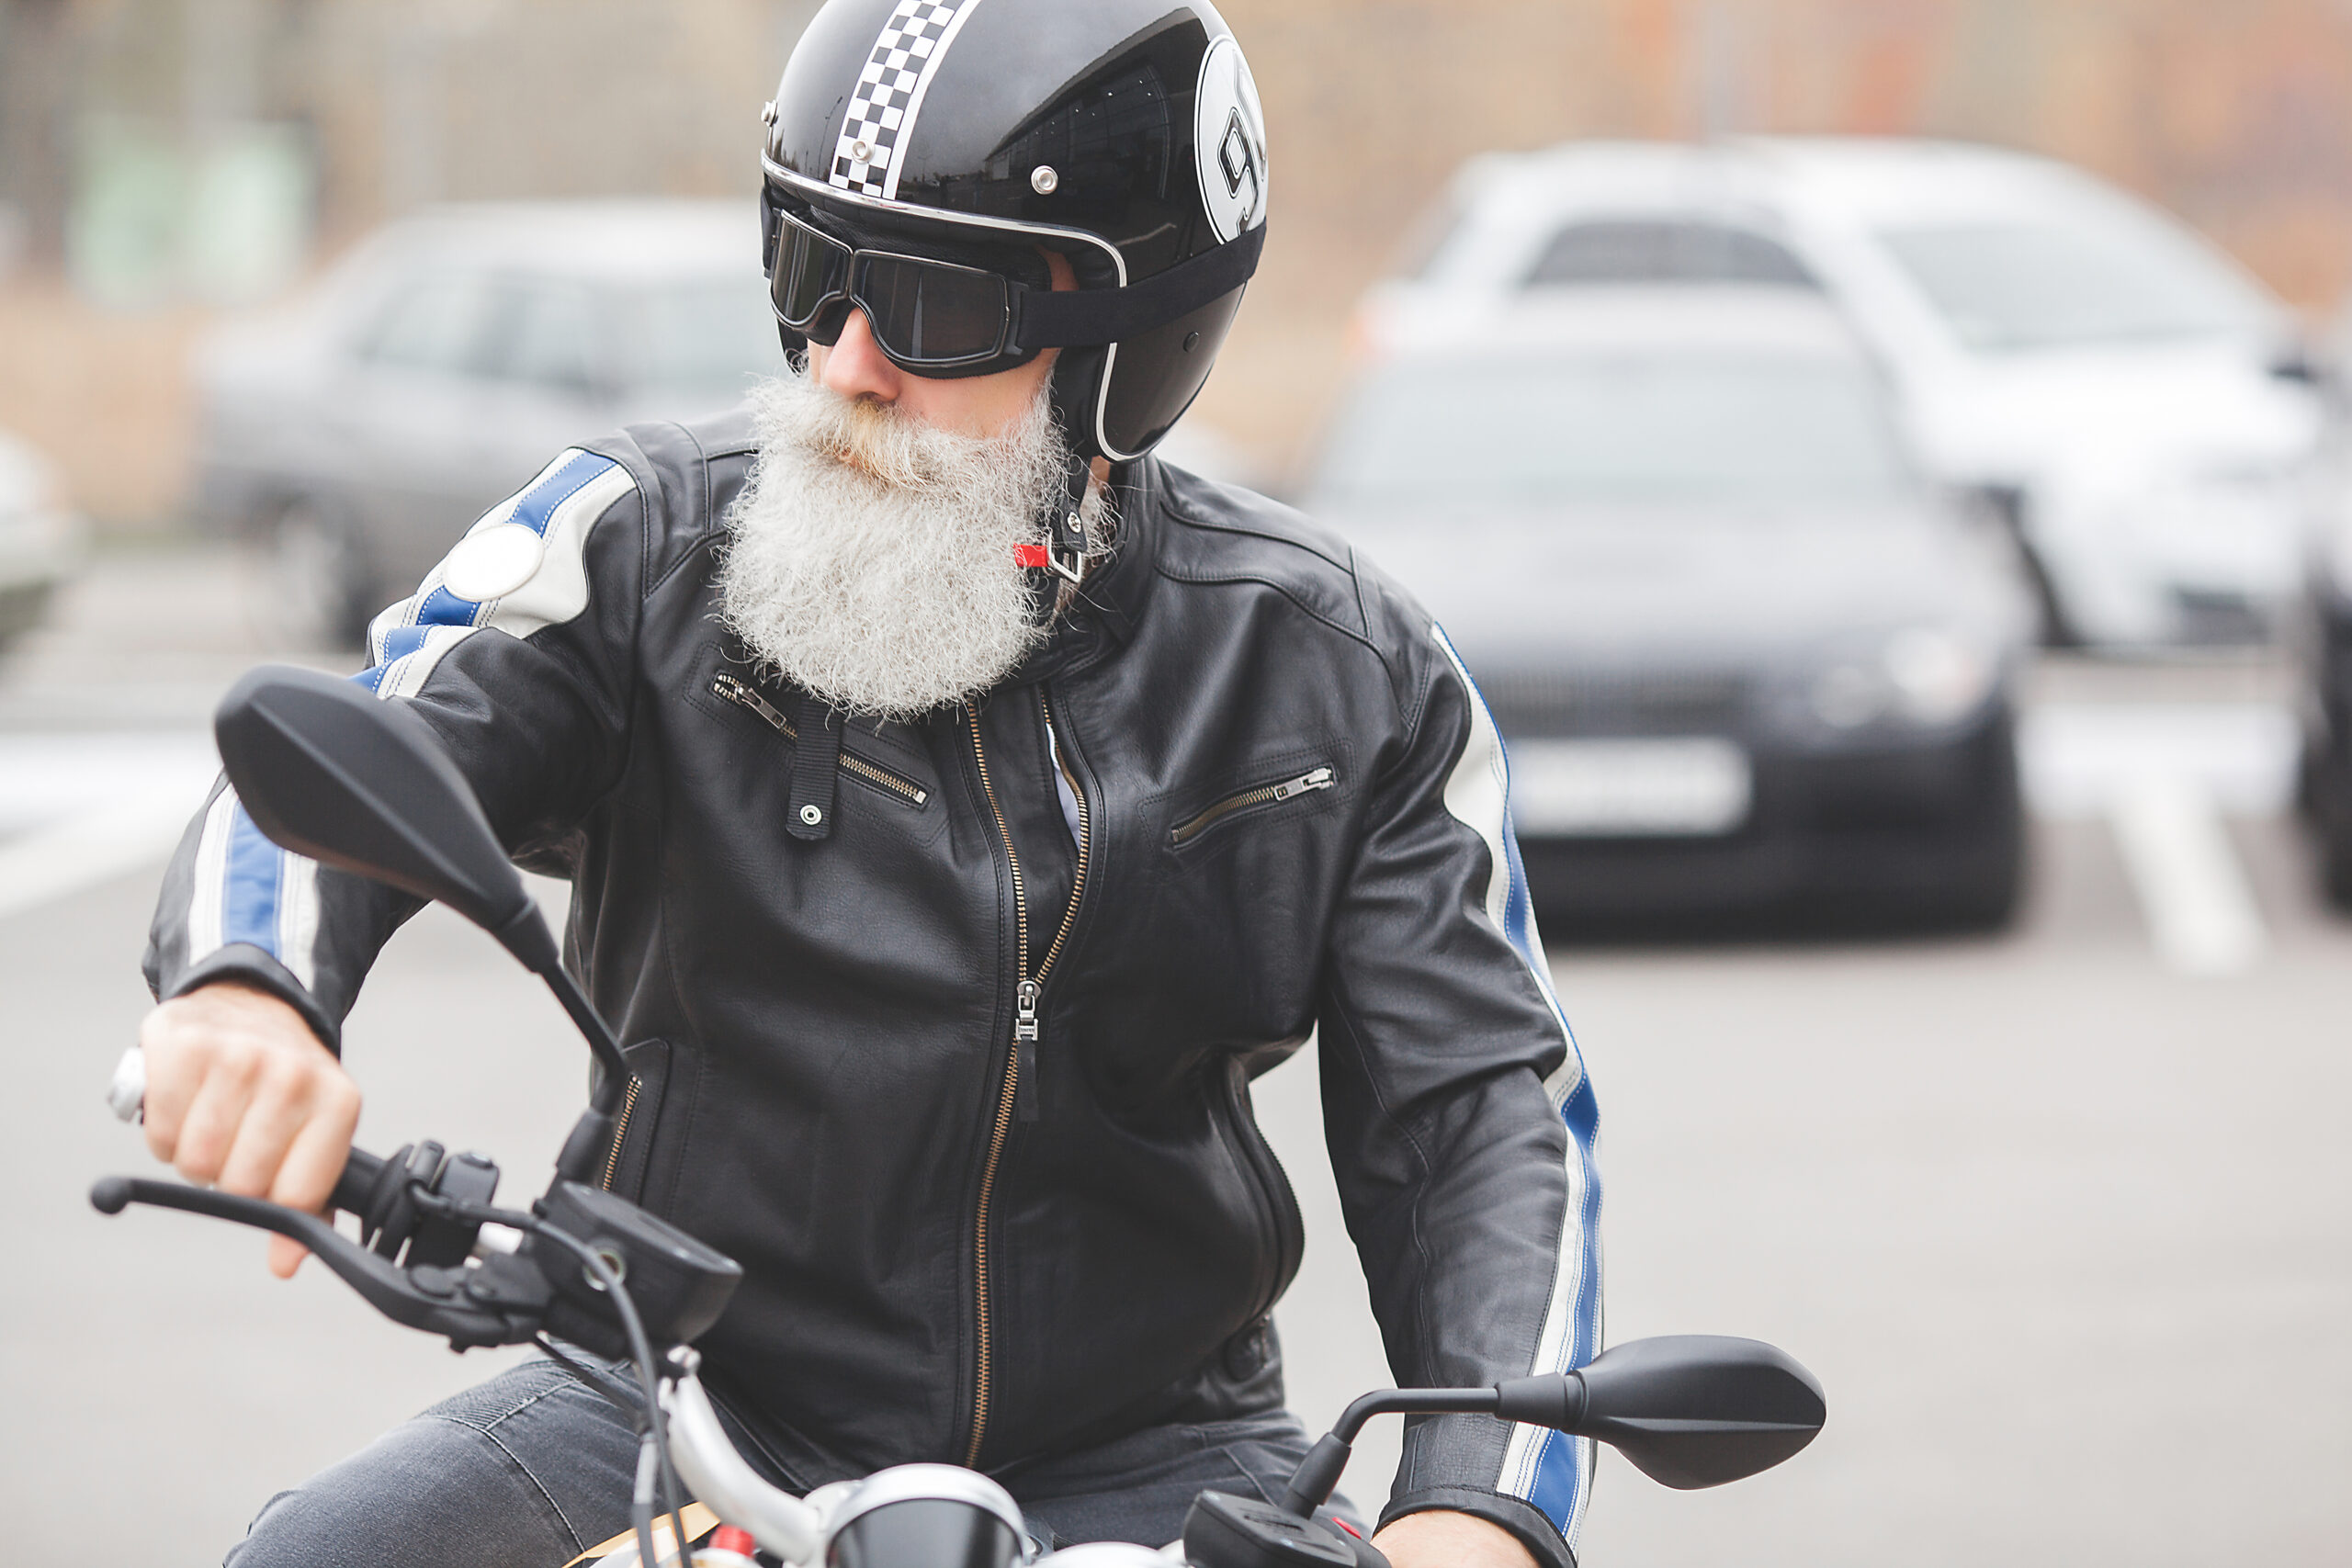 Older male on a motorcycle wearing a helmet and goggles